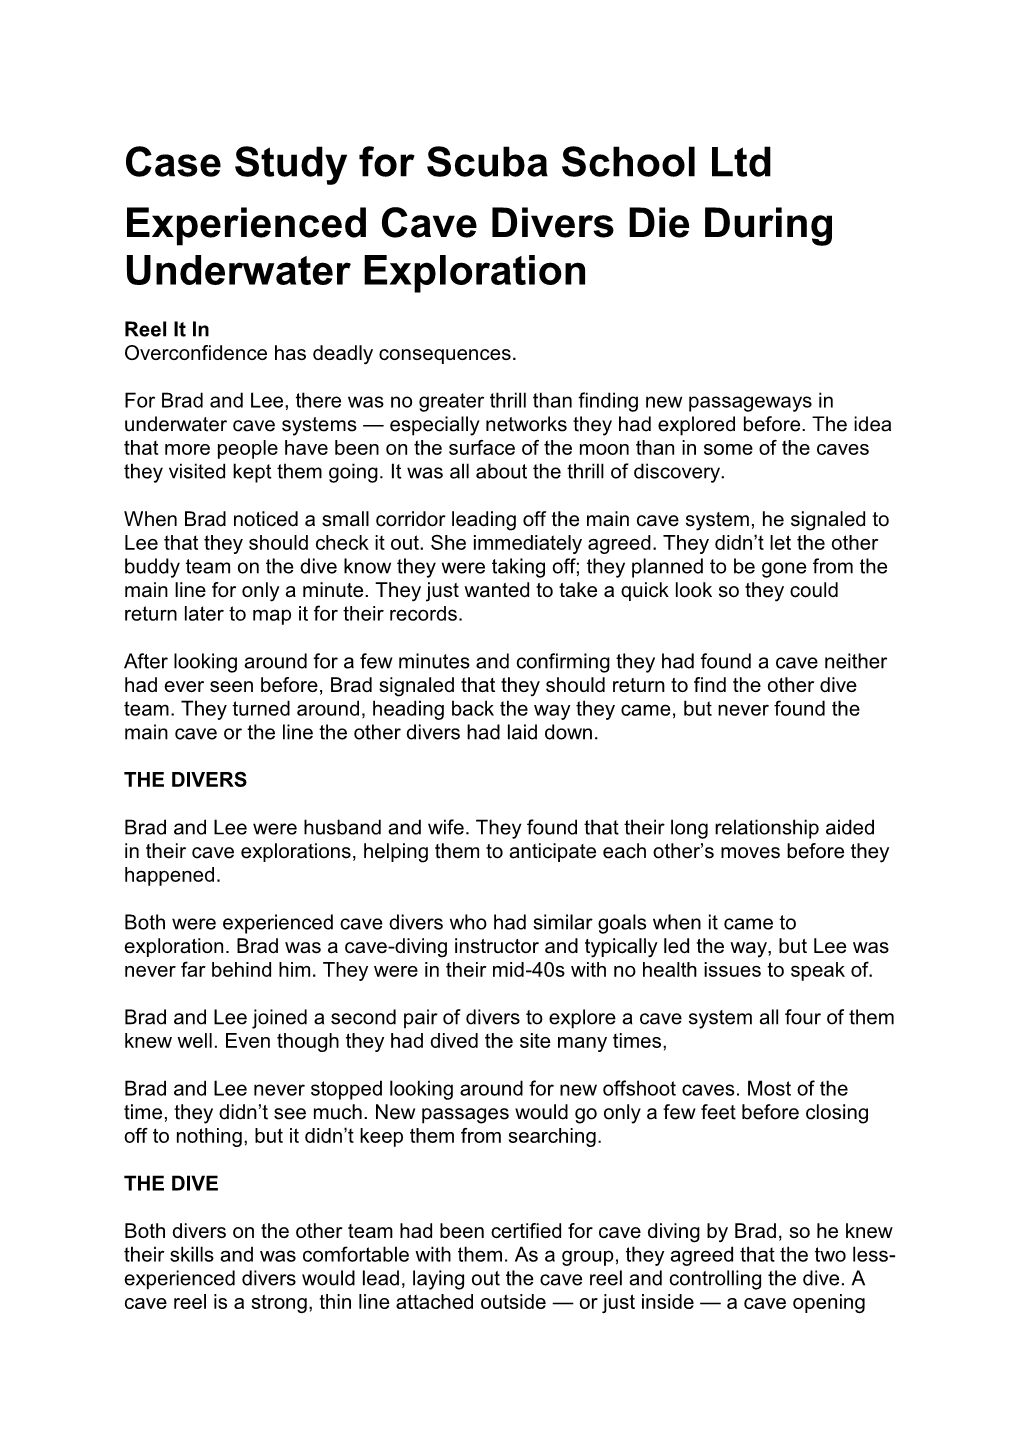 Case Study for Scuba School Ltd Experienced Cave Divers Die During Underwater Exploration